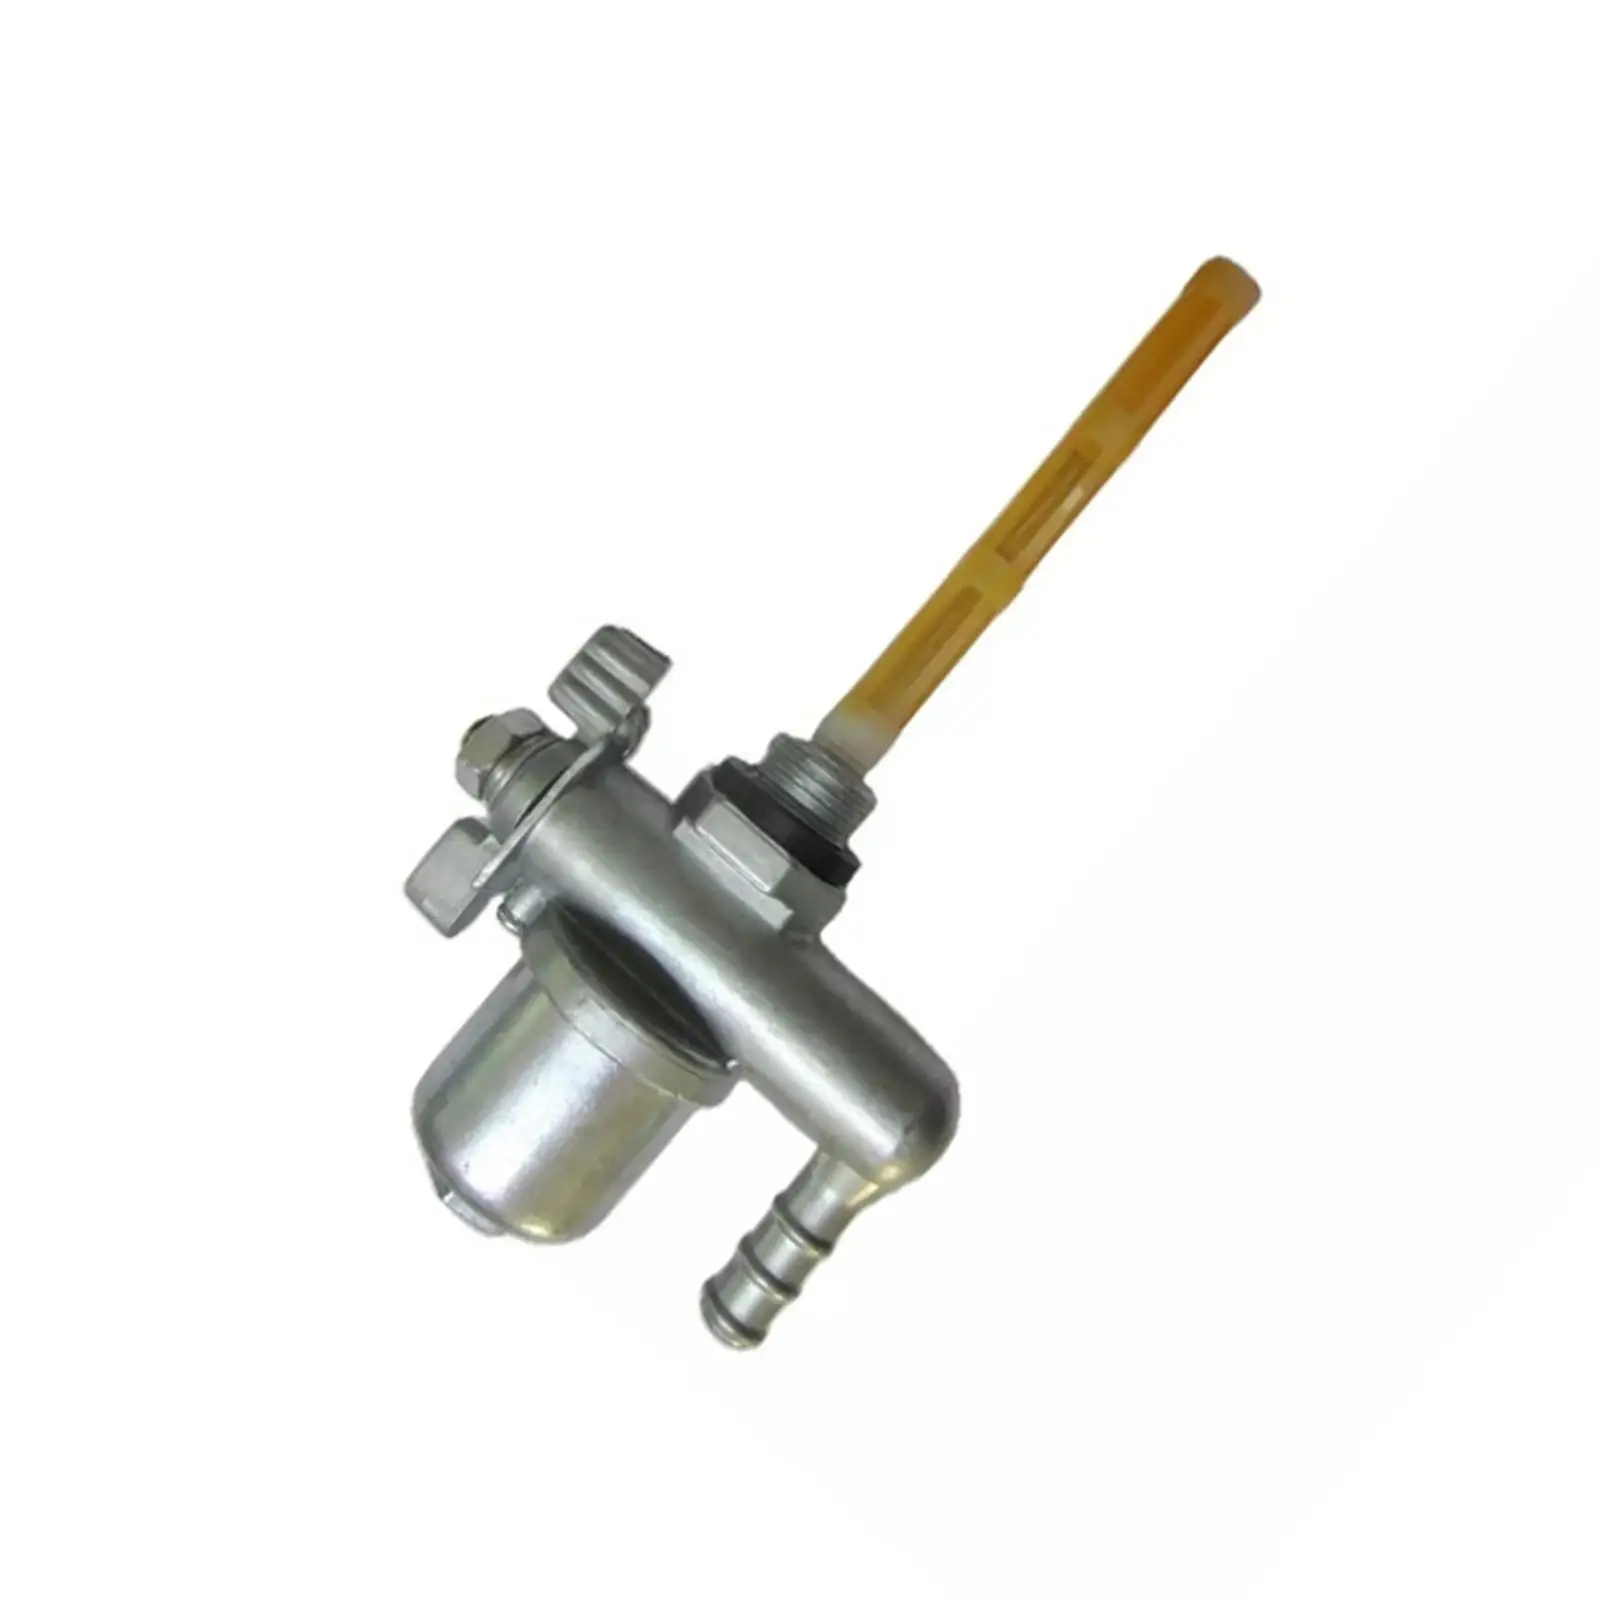 Motorcycle Fuel Gas Tank Switch Petcock for Ruassia Msk Motorbikes Supplies